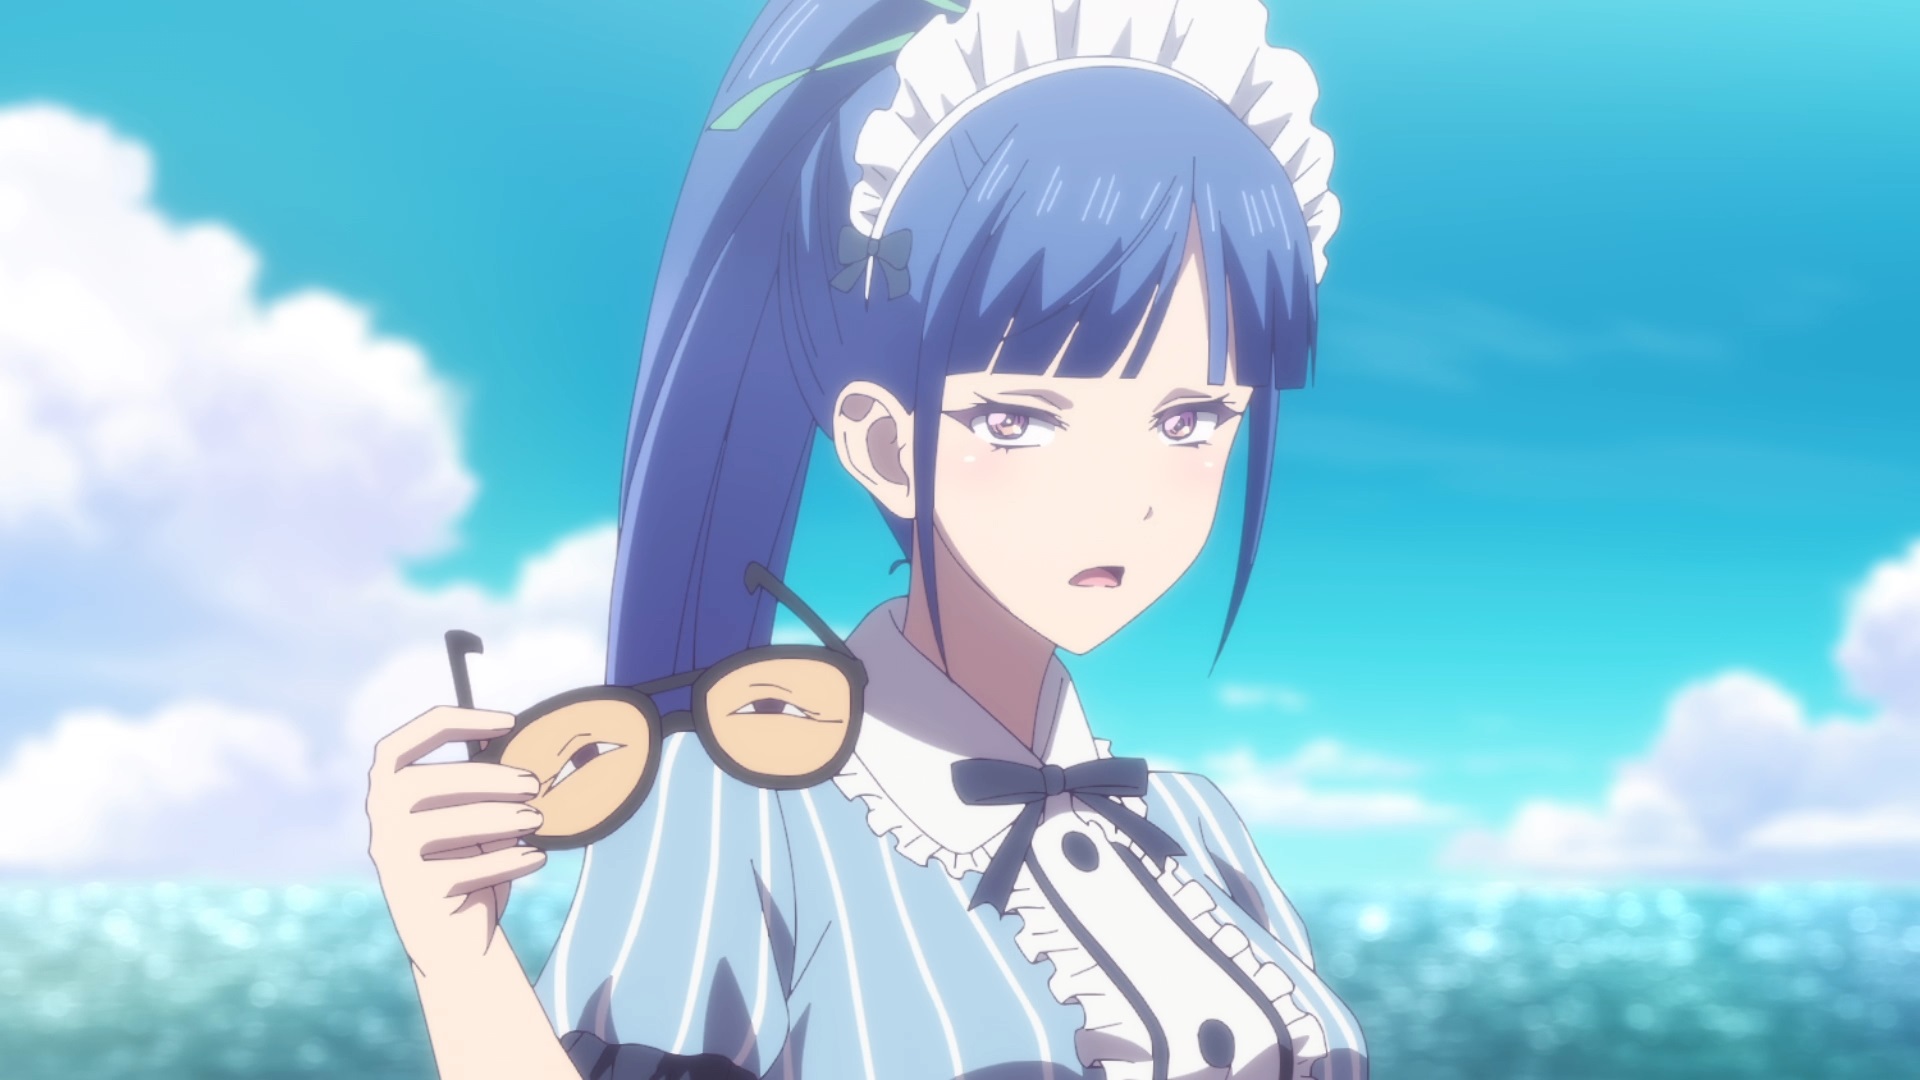 Megami no Cafe Terrace animated lewd filter even hotter than the